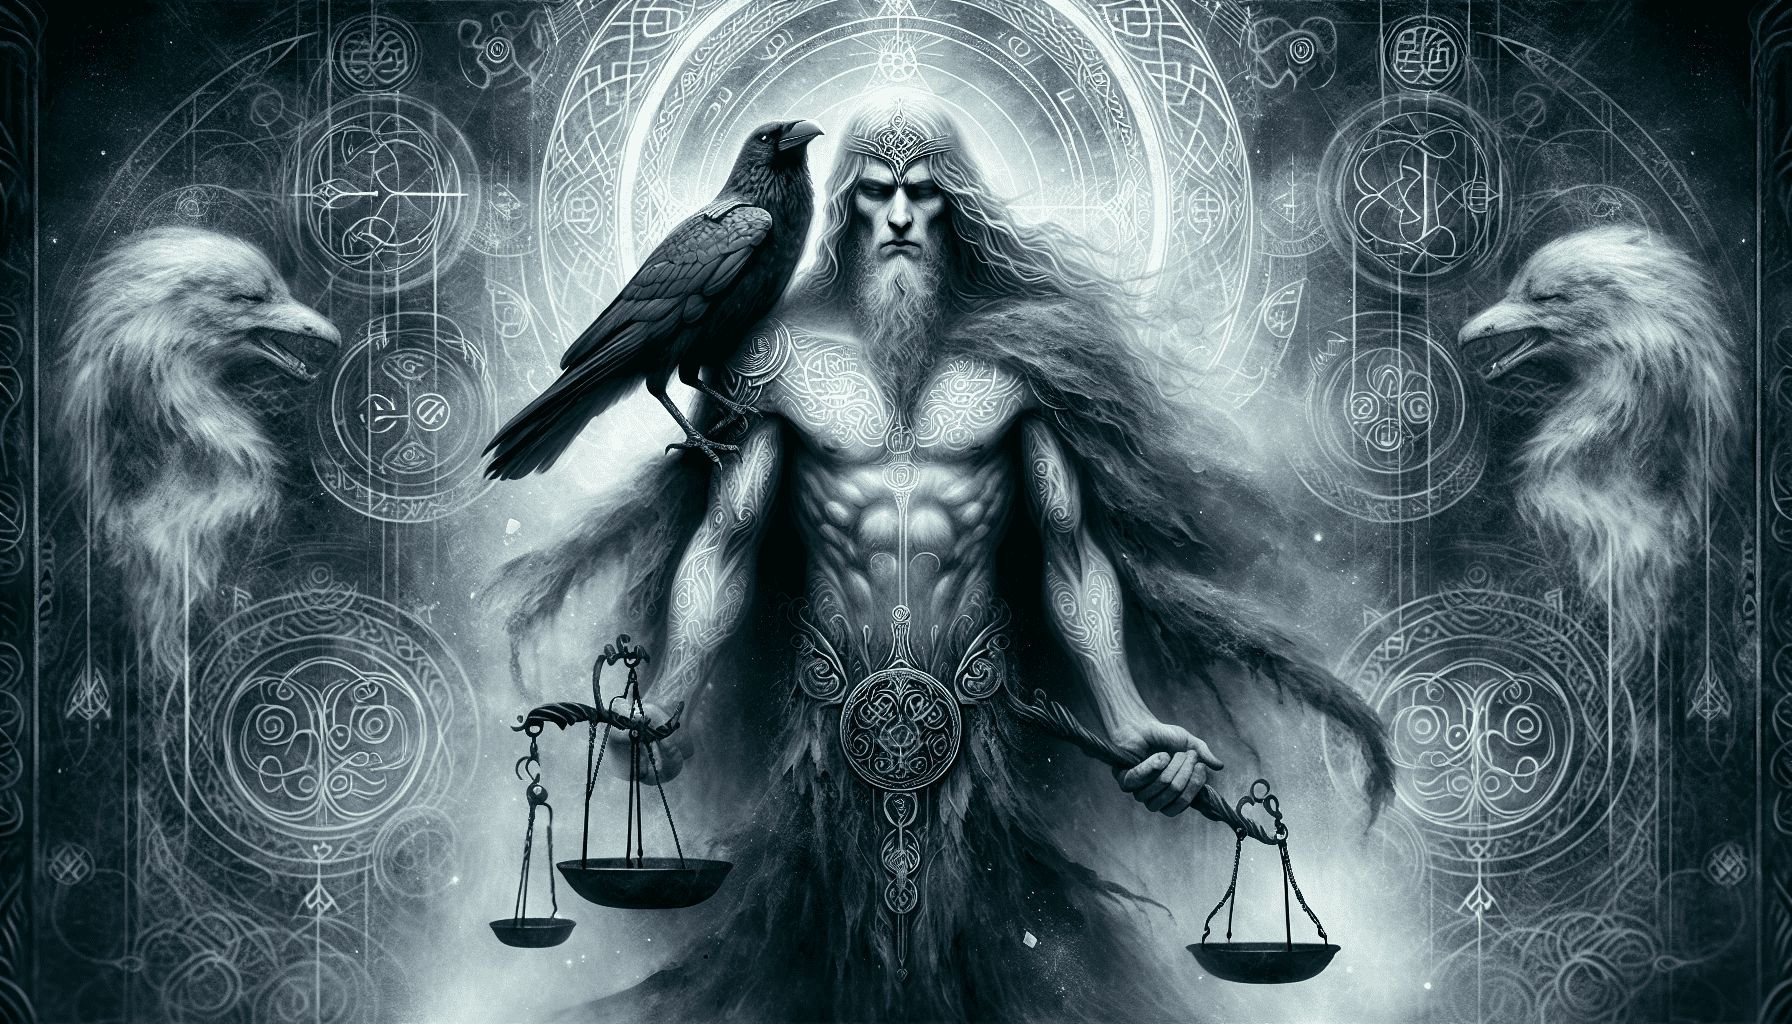 Artistic depiction of lesser-known Celtic deity Arawn, ruler of the underworld